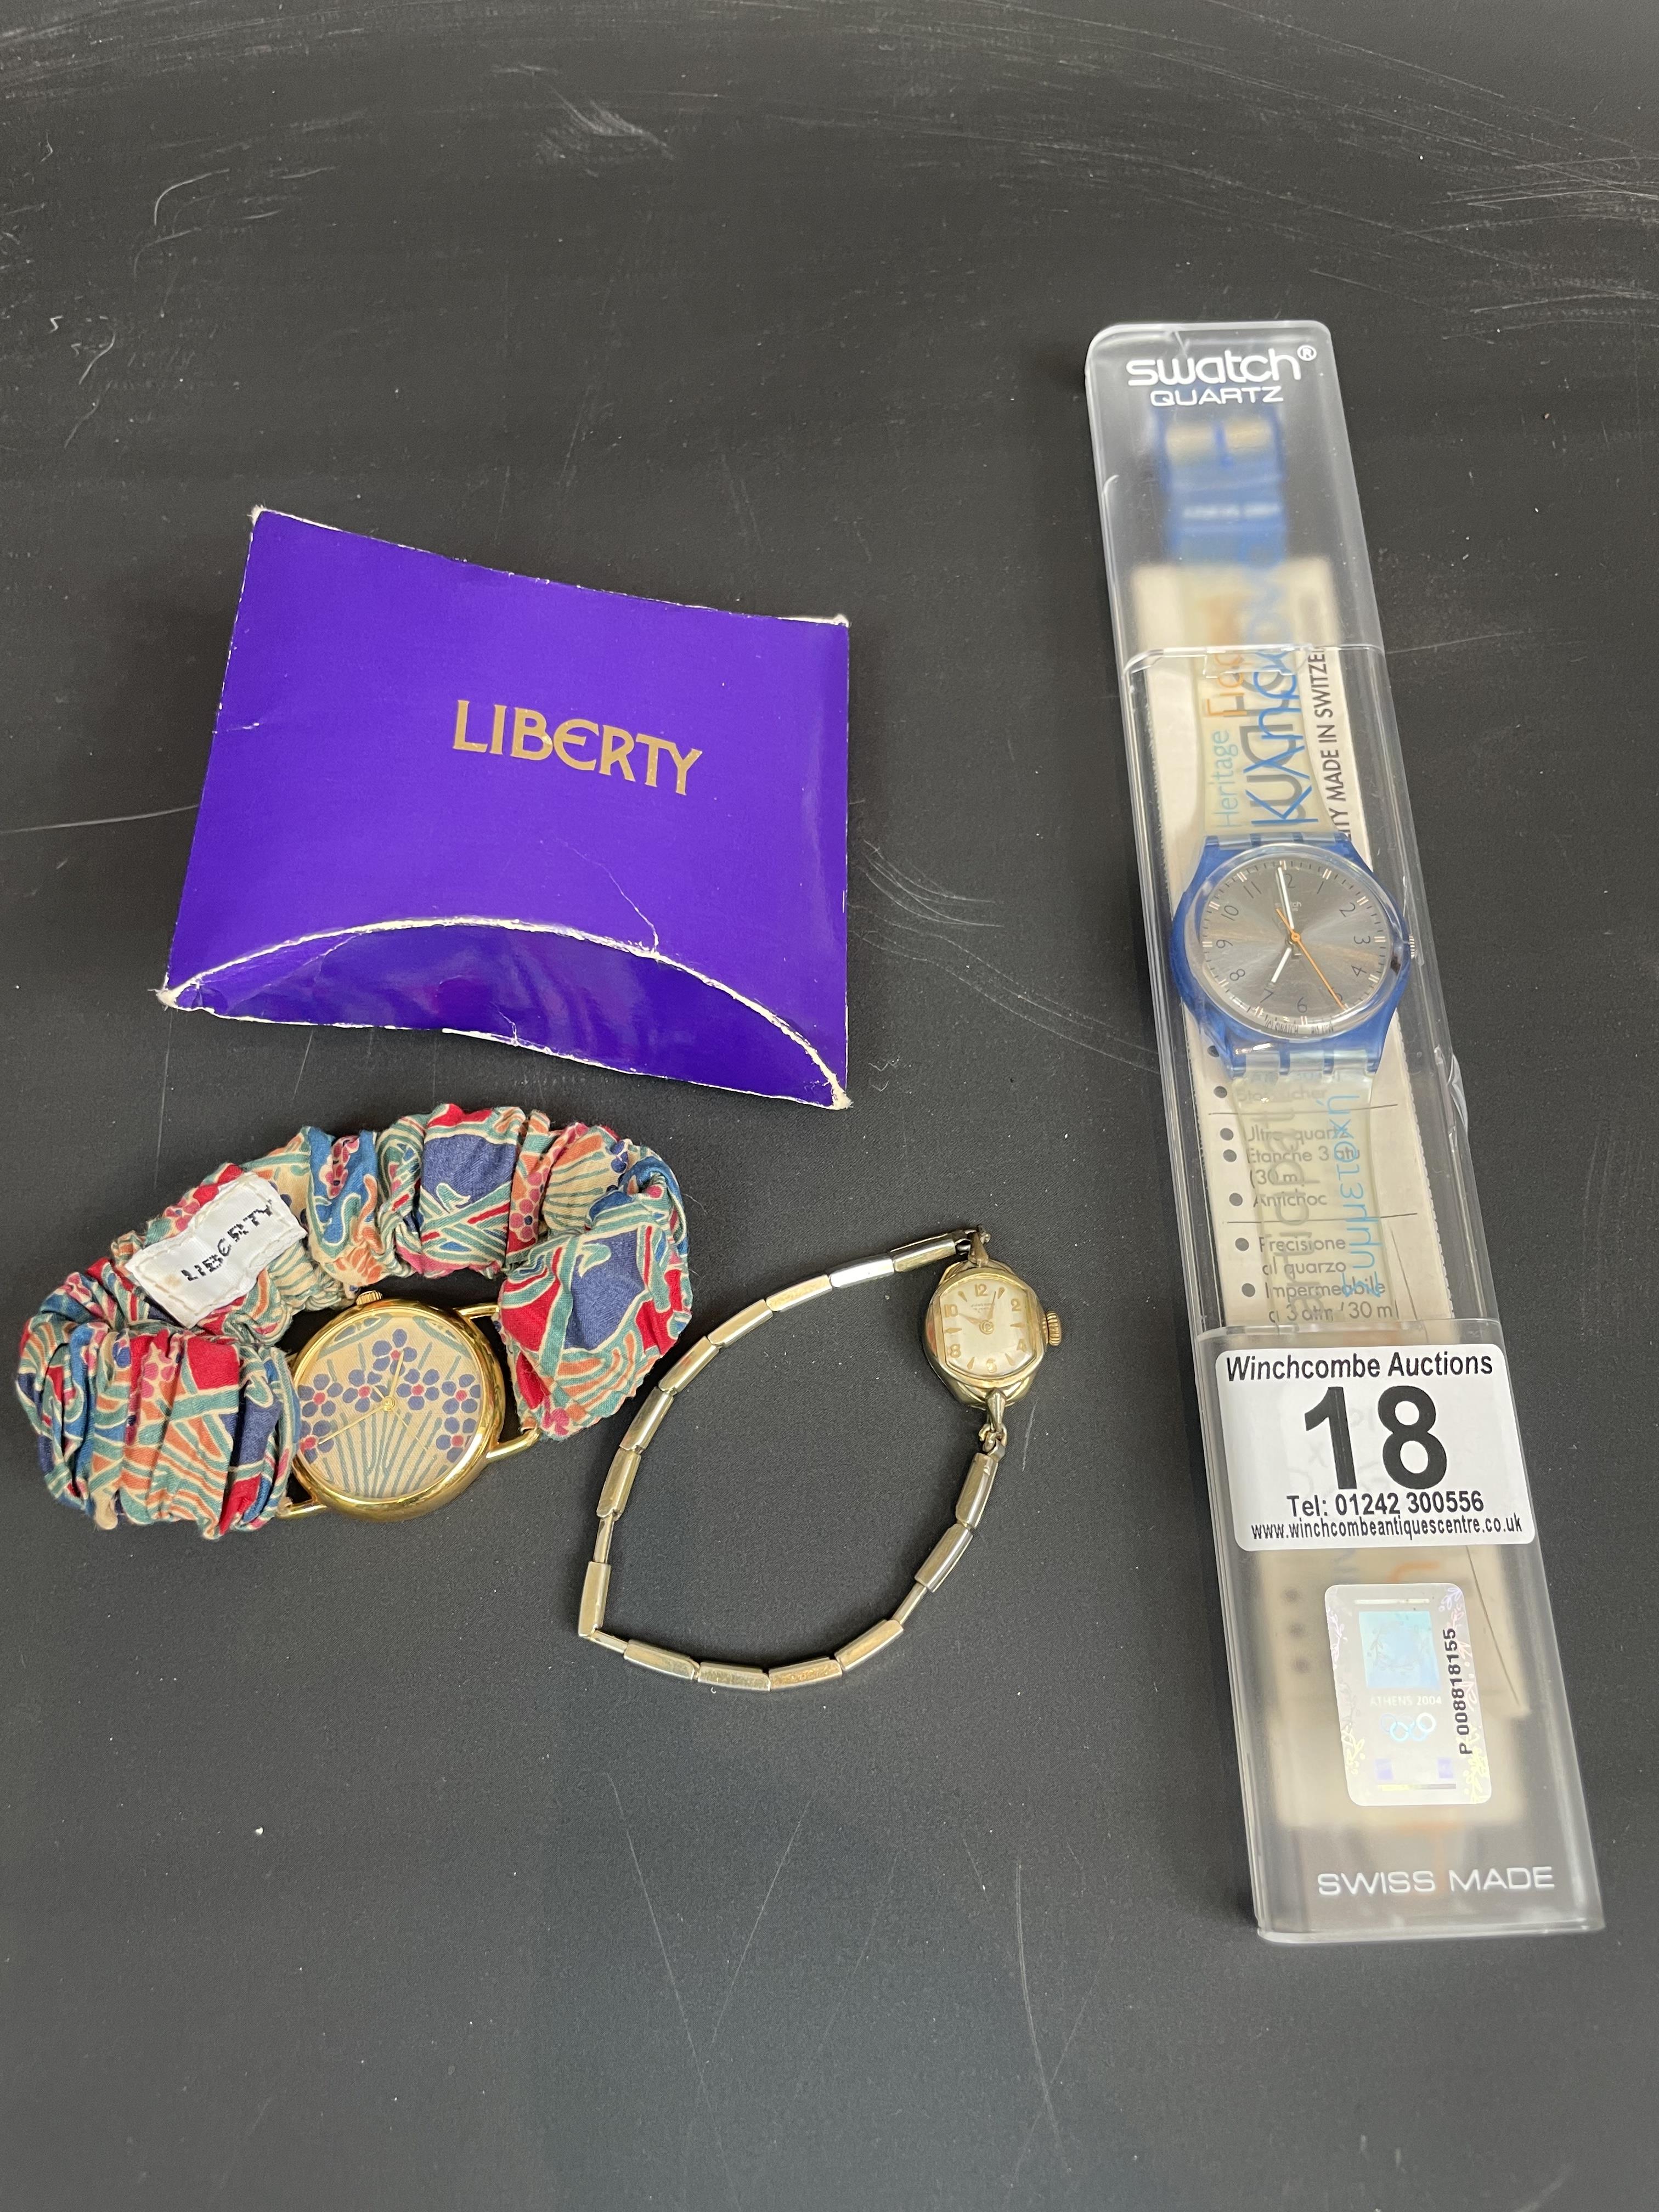 A collection of three watches including one by Liberty